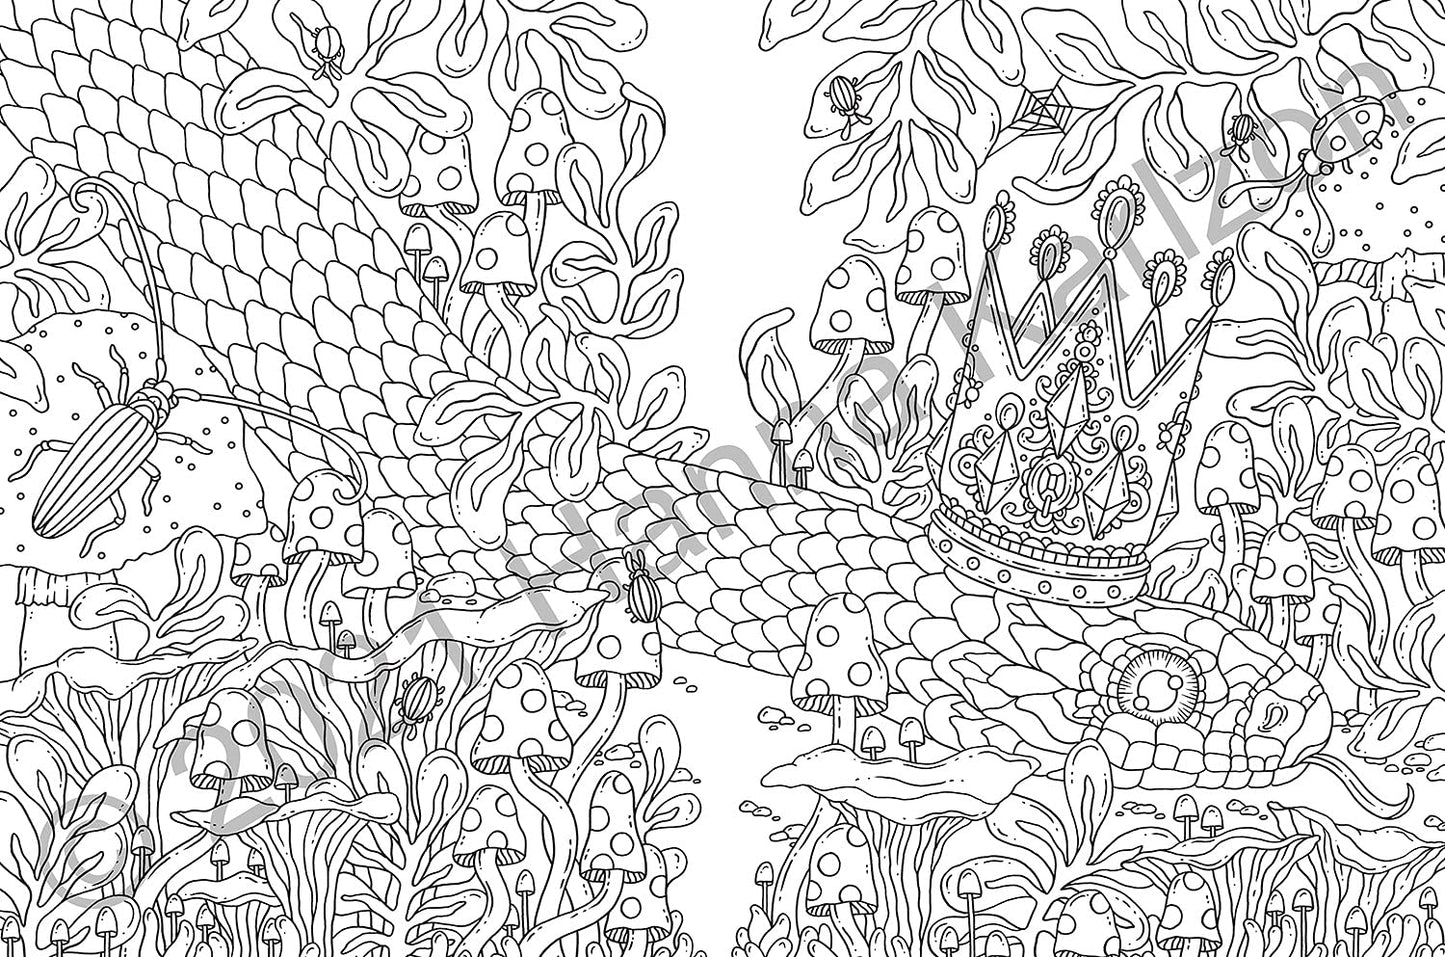 Tales from the Forest Kingdom Coloring Book by Hanna Karlzon